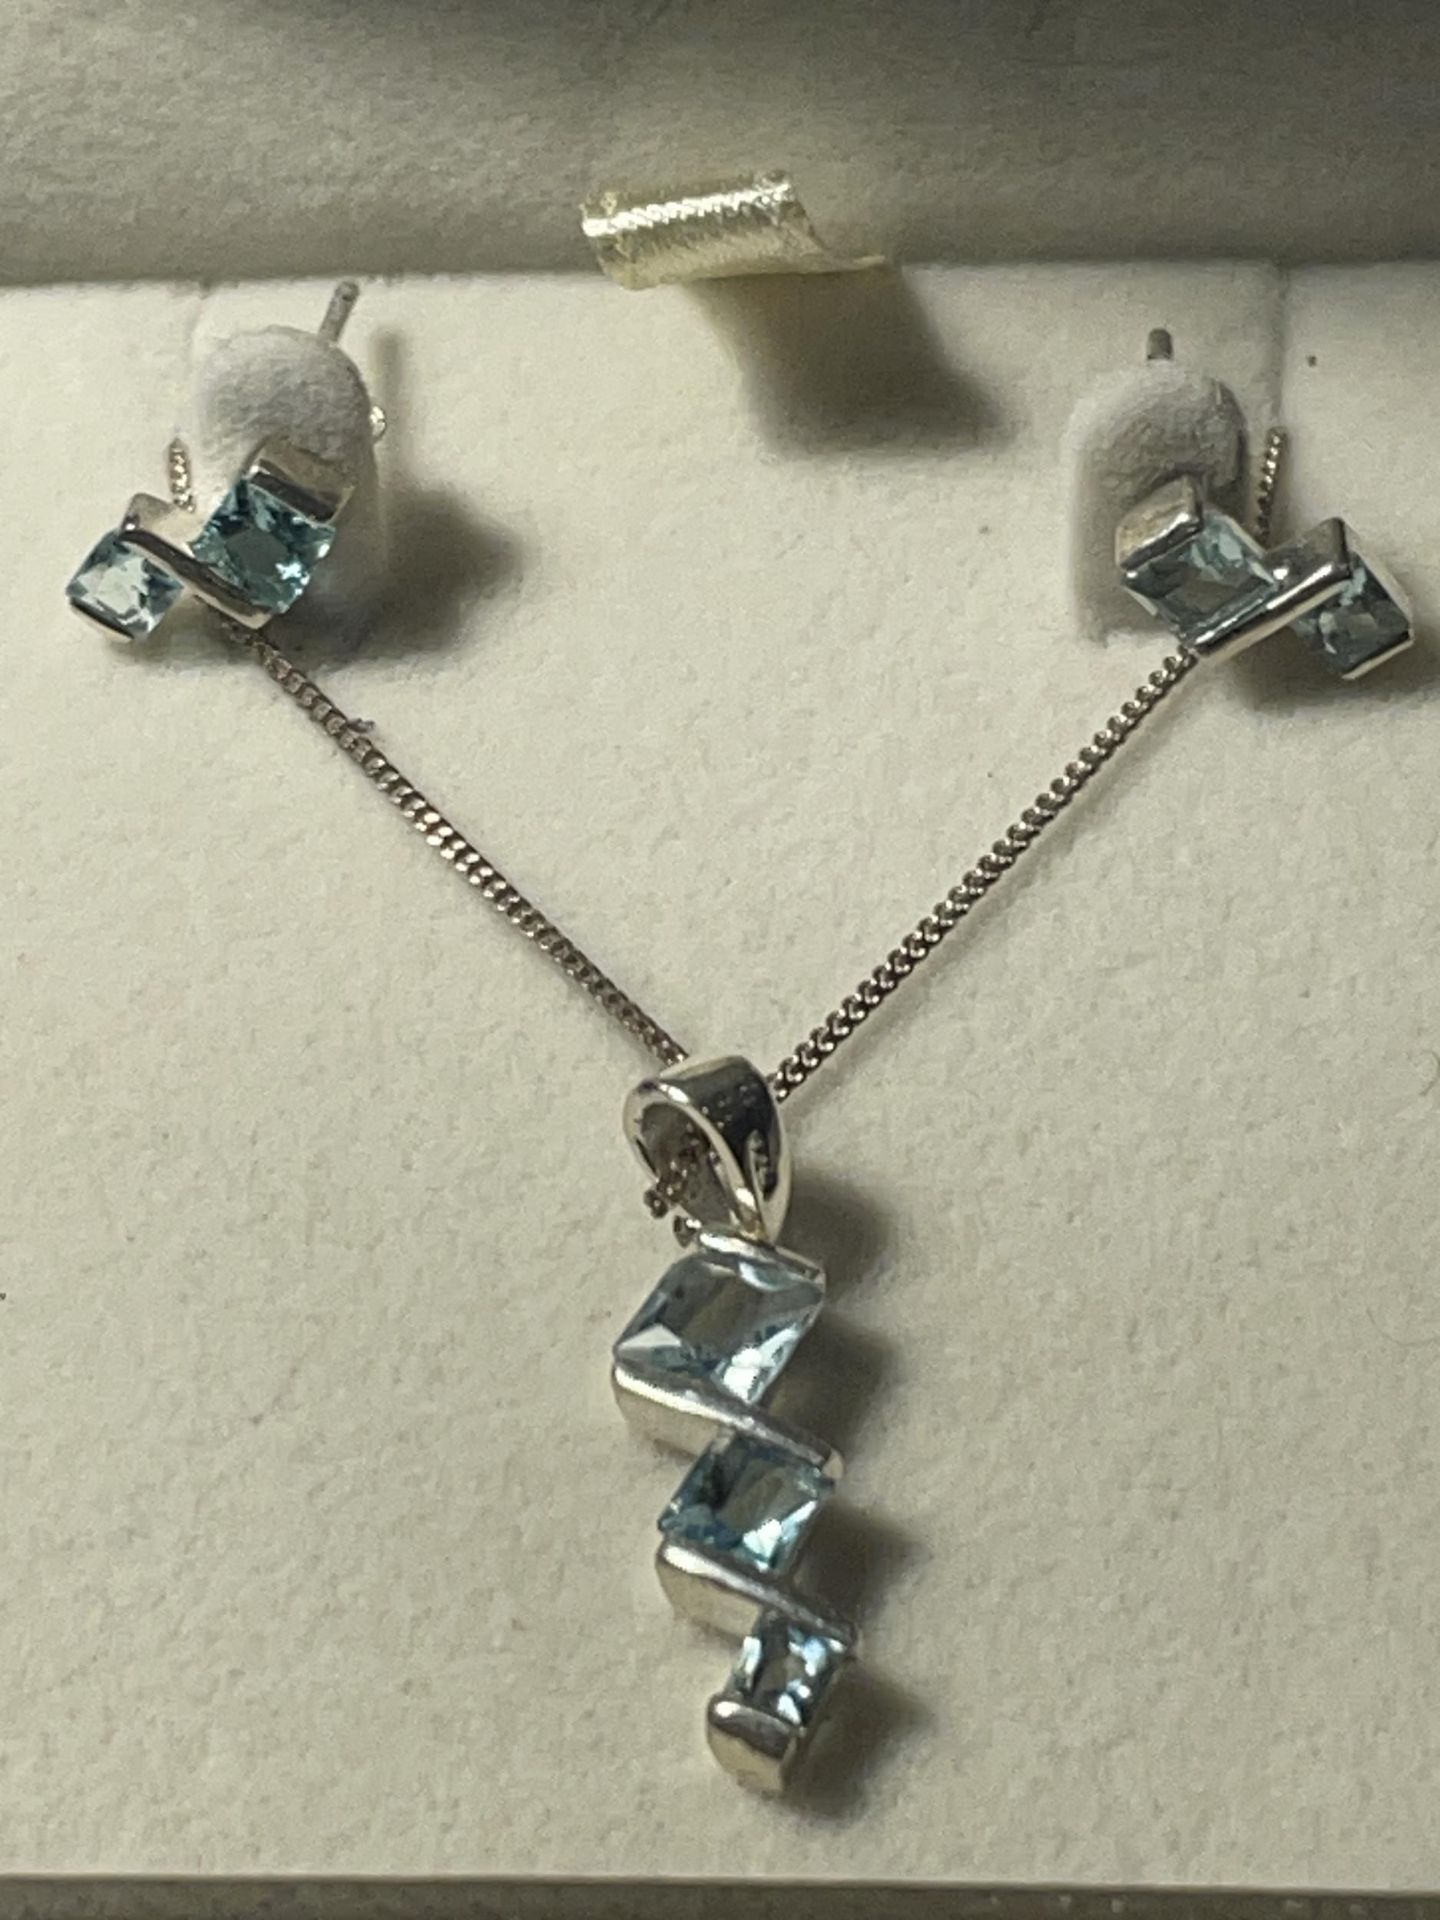 A SILVER NECKLACE AND EARRING SET WITH AQUAMARINE COLOURED STONES IN A PRESENTATION BOX - Image 2 of 4